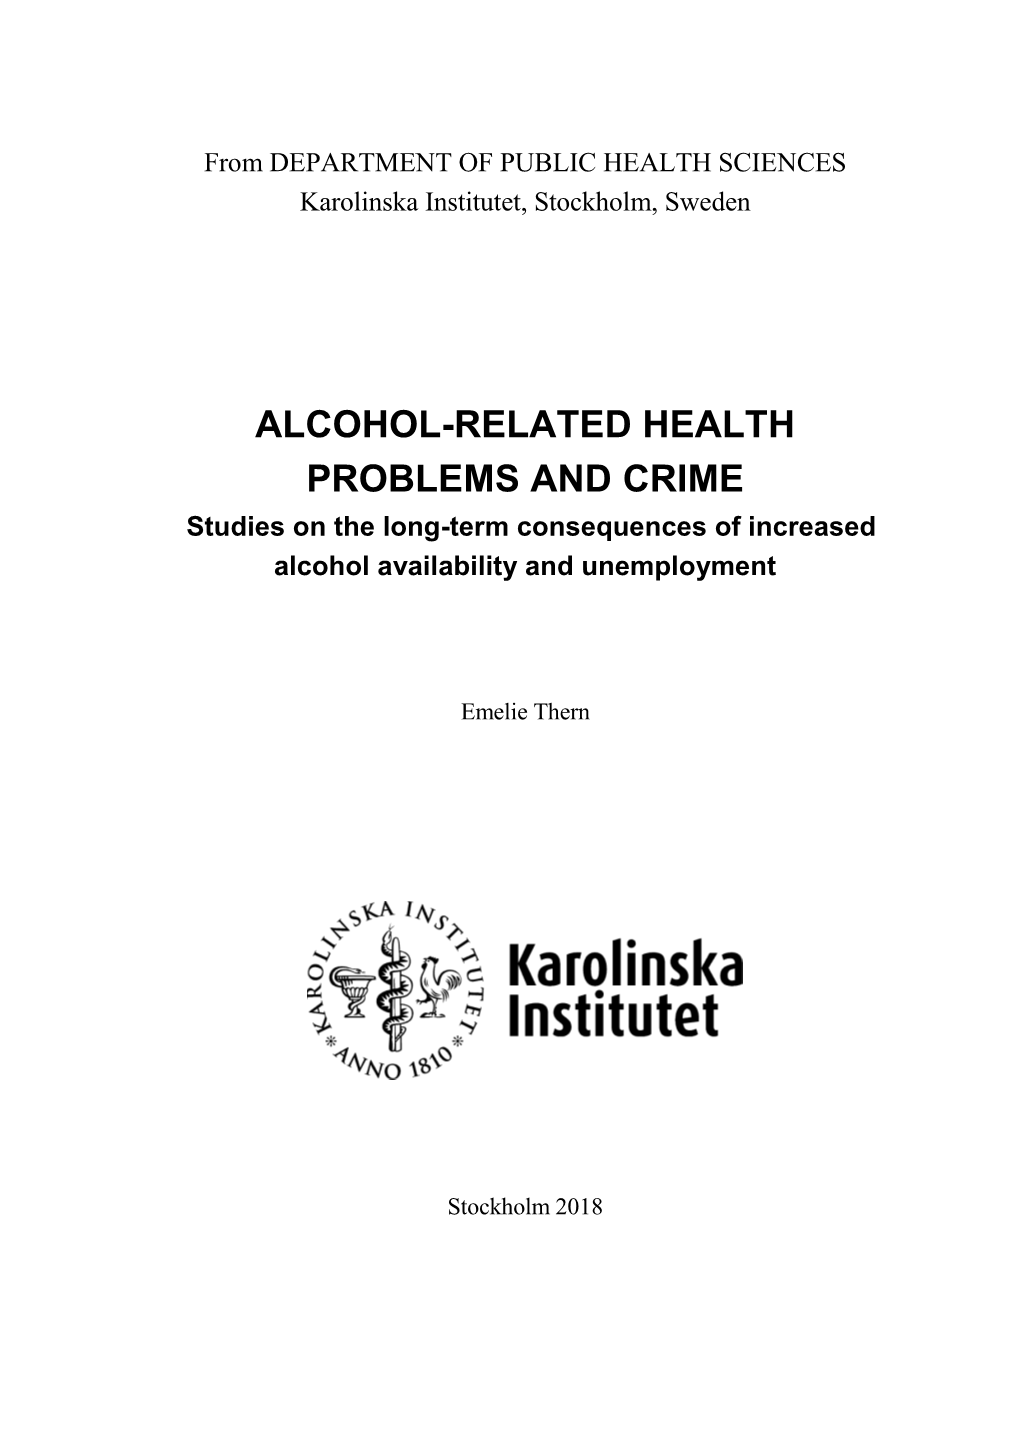 ALCOHOL-RELATED HEALTH PROBLEMS and CRIME Studies on the Long-Term Consequences of Increased Alcohol Availability and Unemployment